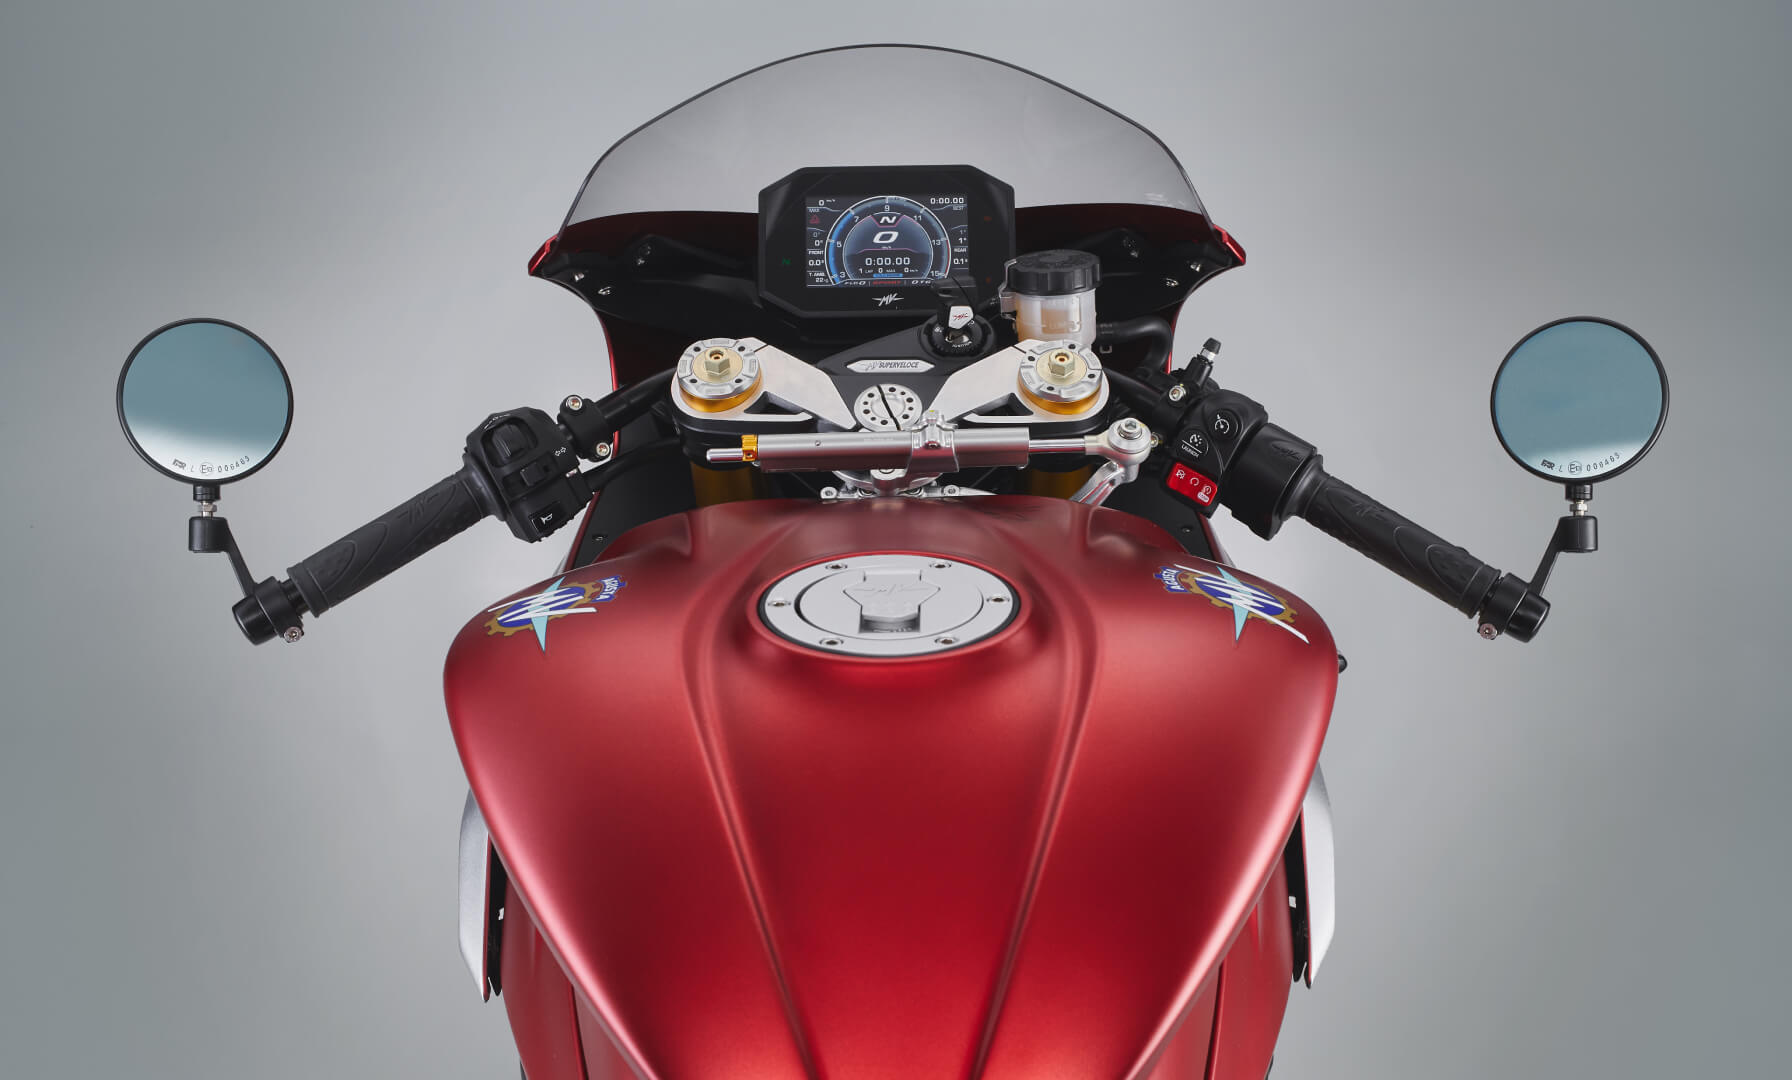 A view of the rideng position on the new Special Edition Superveloce Ago created in commemoration of Giacomo Agostini